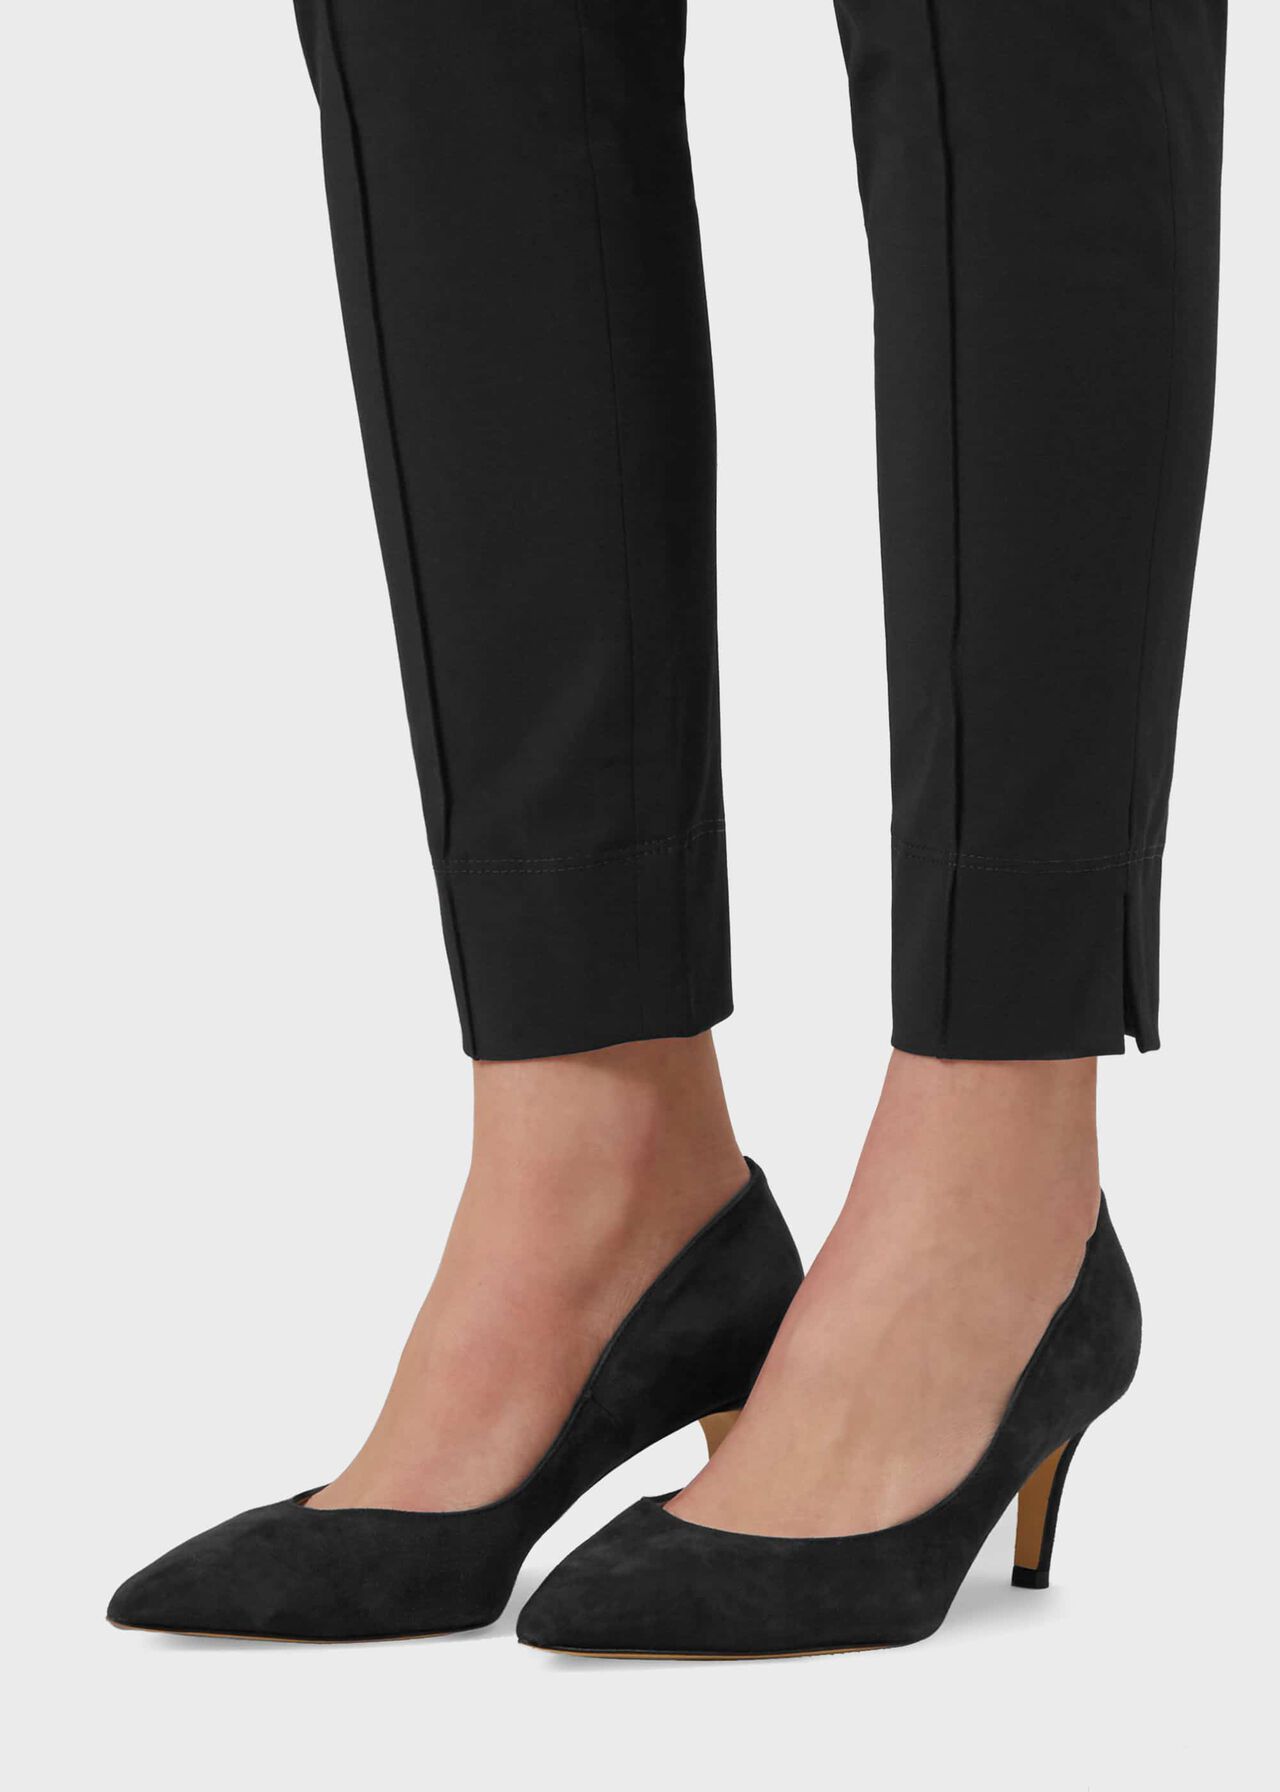 Adrianna Pants With Stretch, Black, hi-res